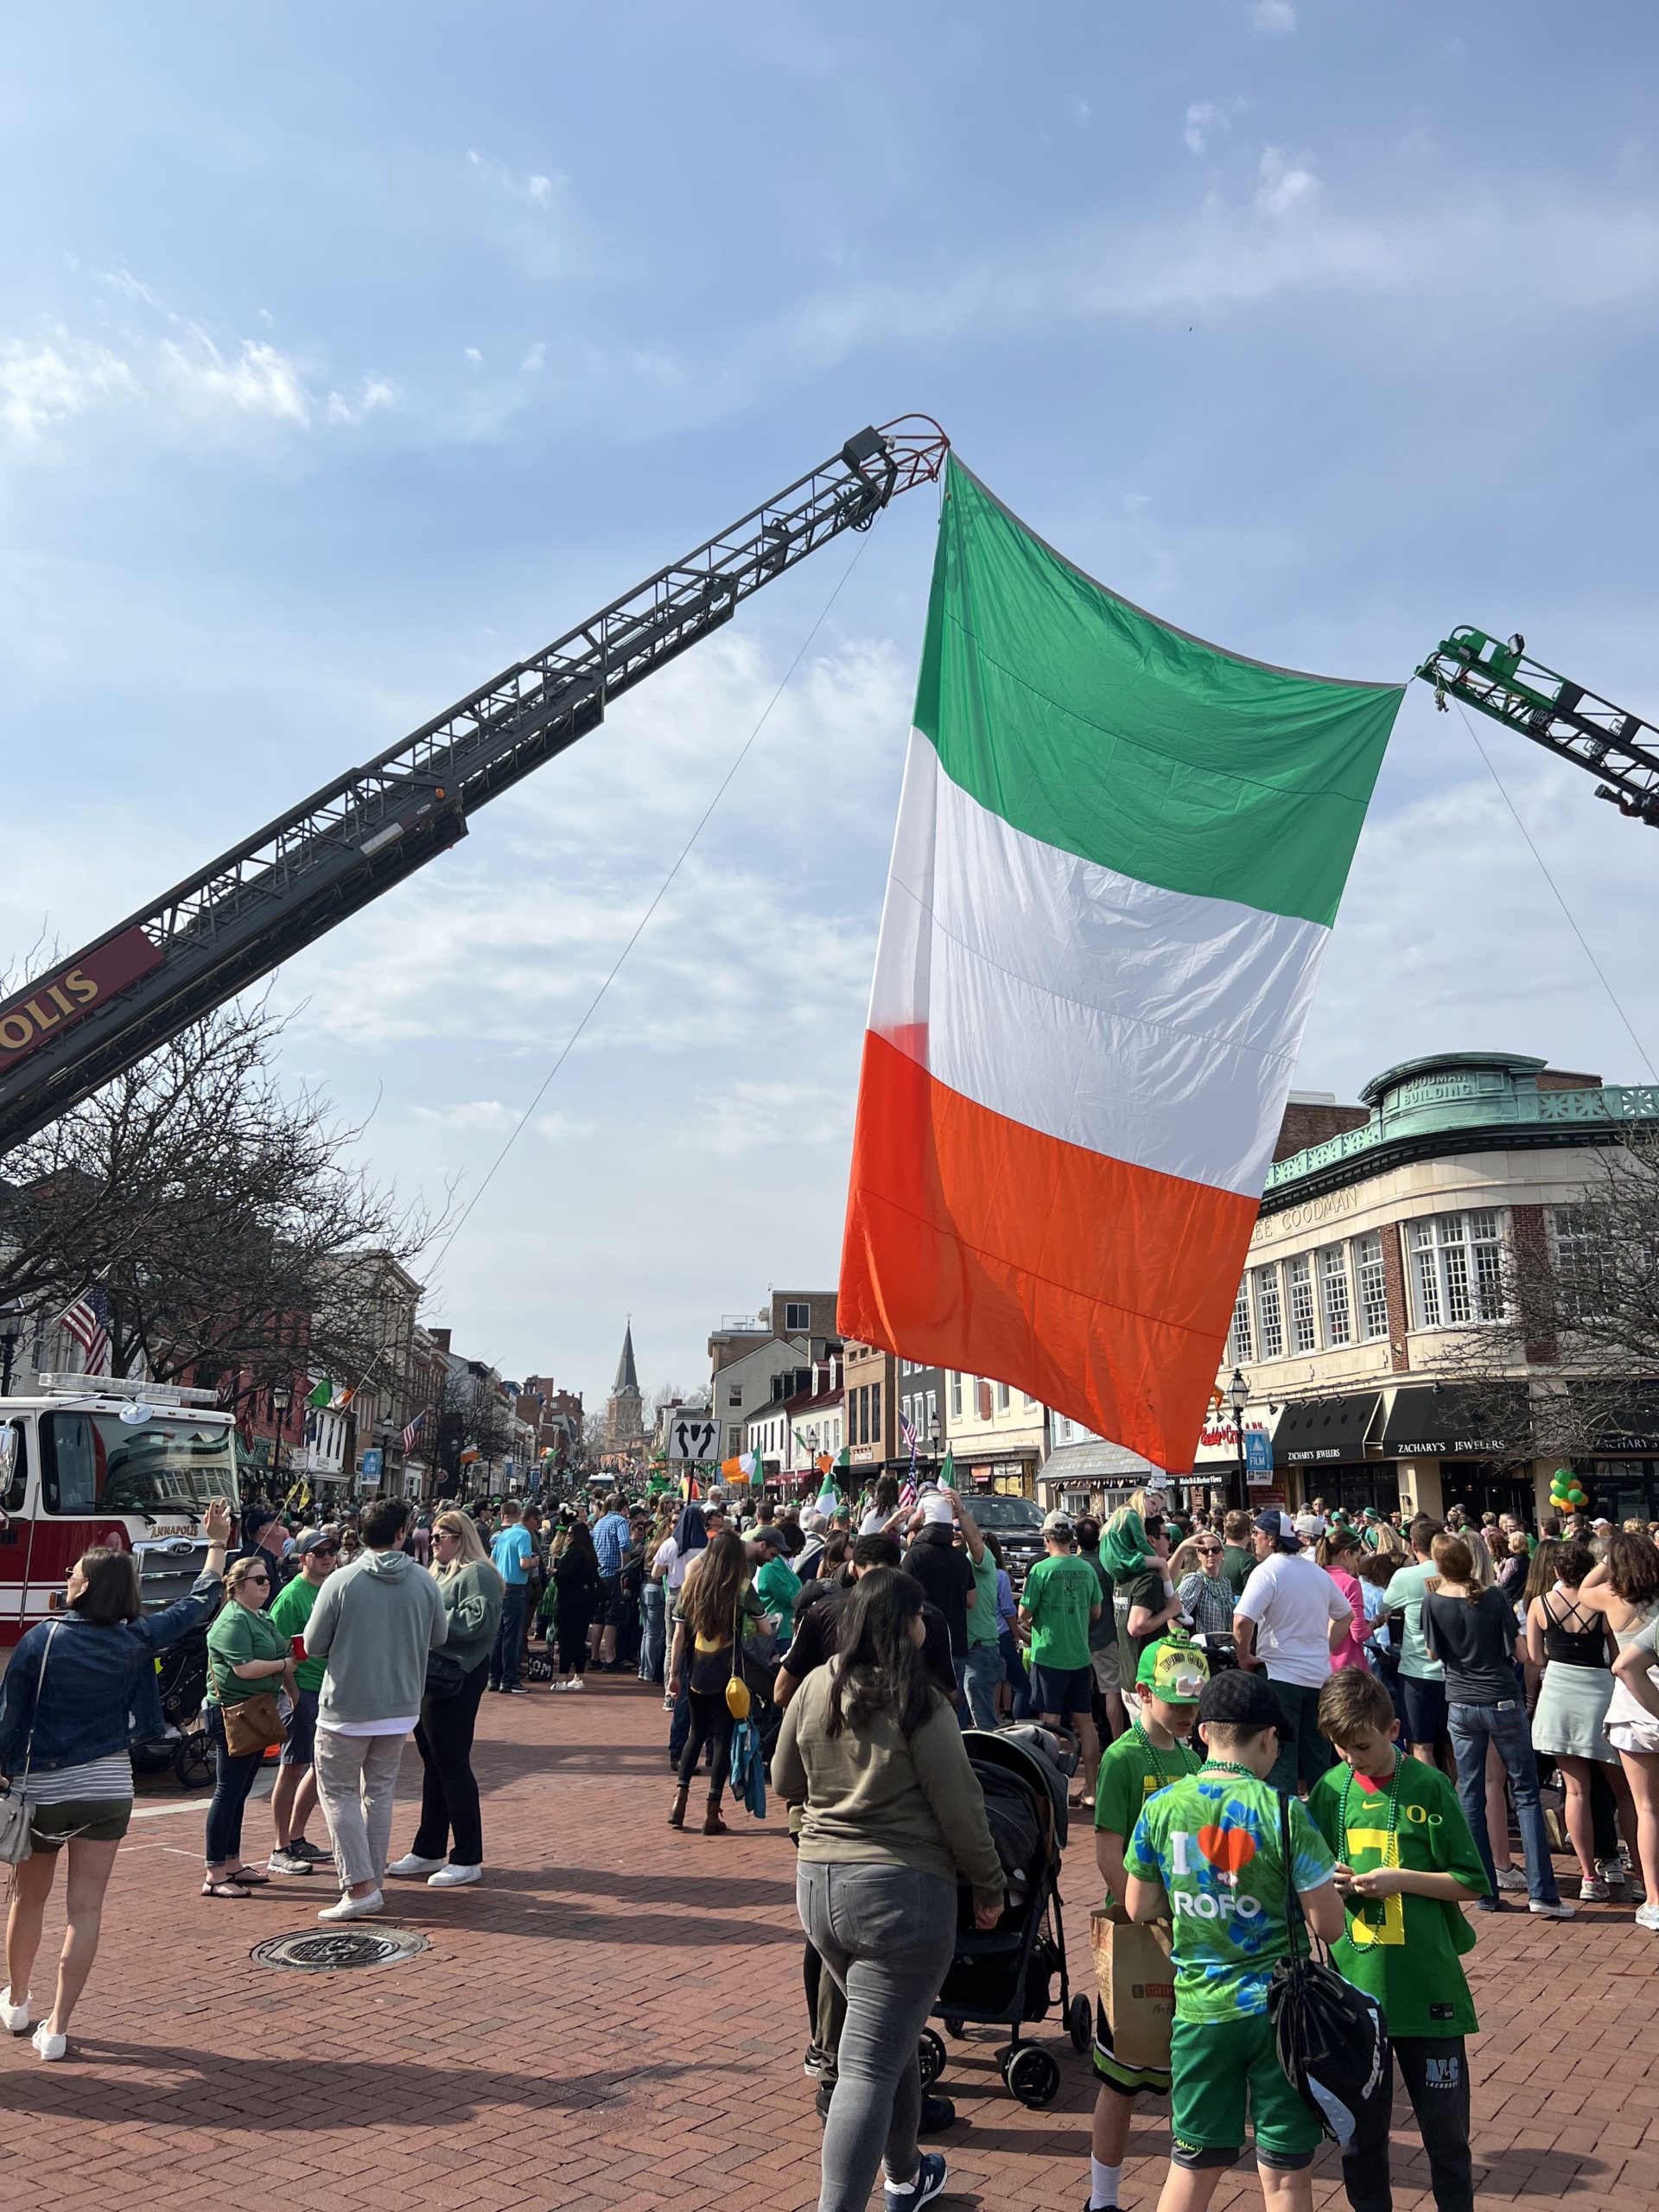 Fence & Deck Connection Celebrates St. Patrick's Day in Annapolis